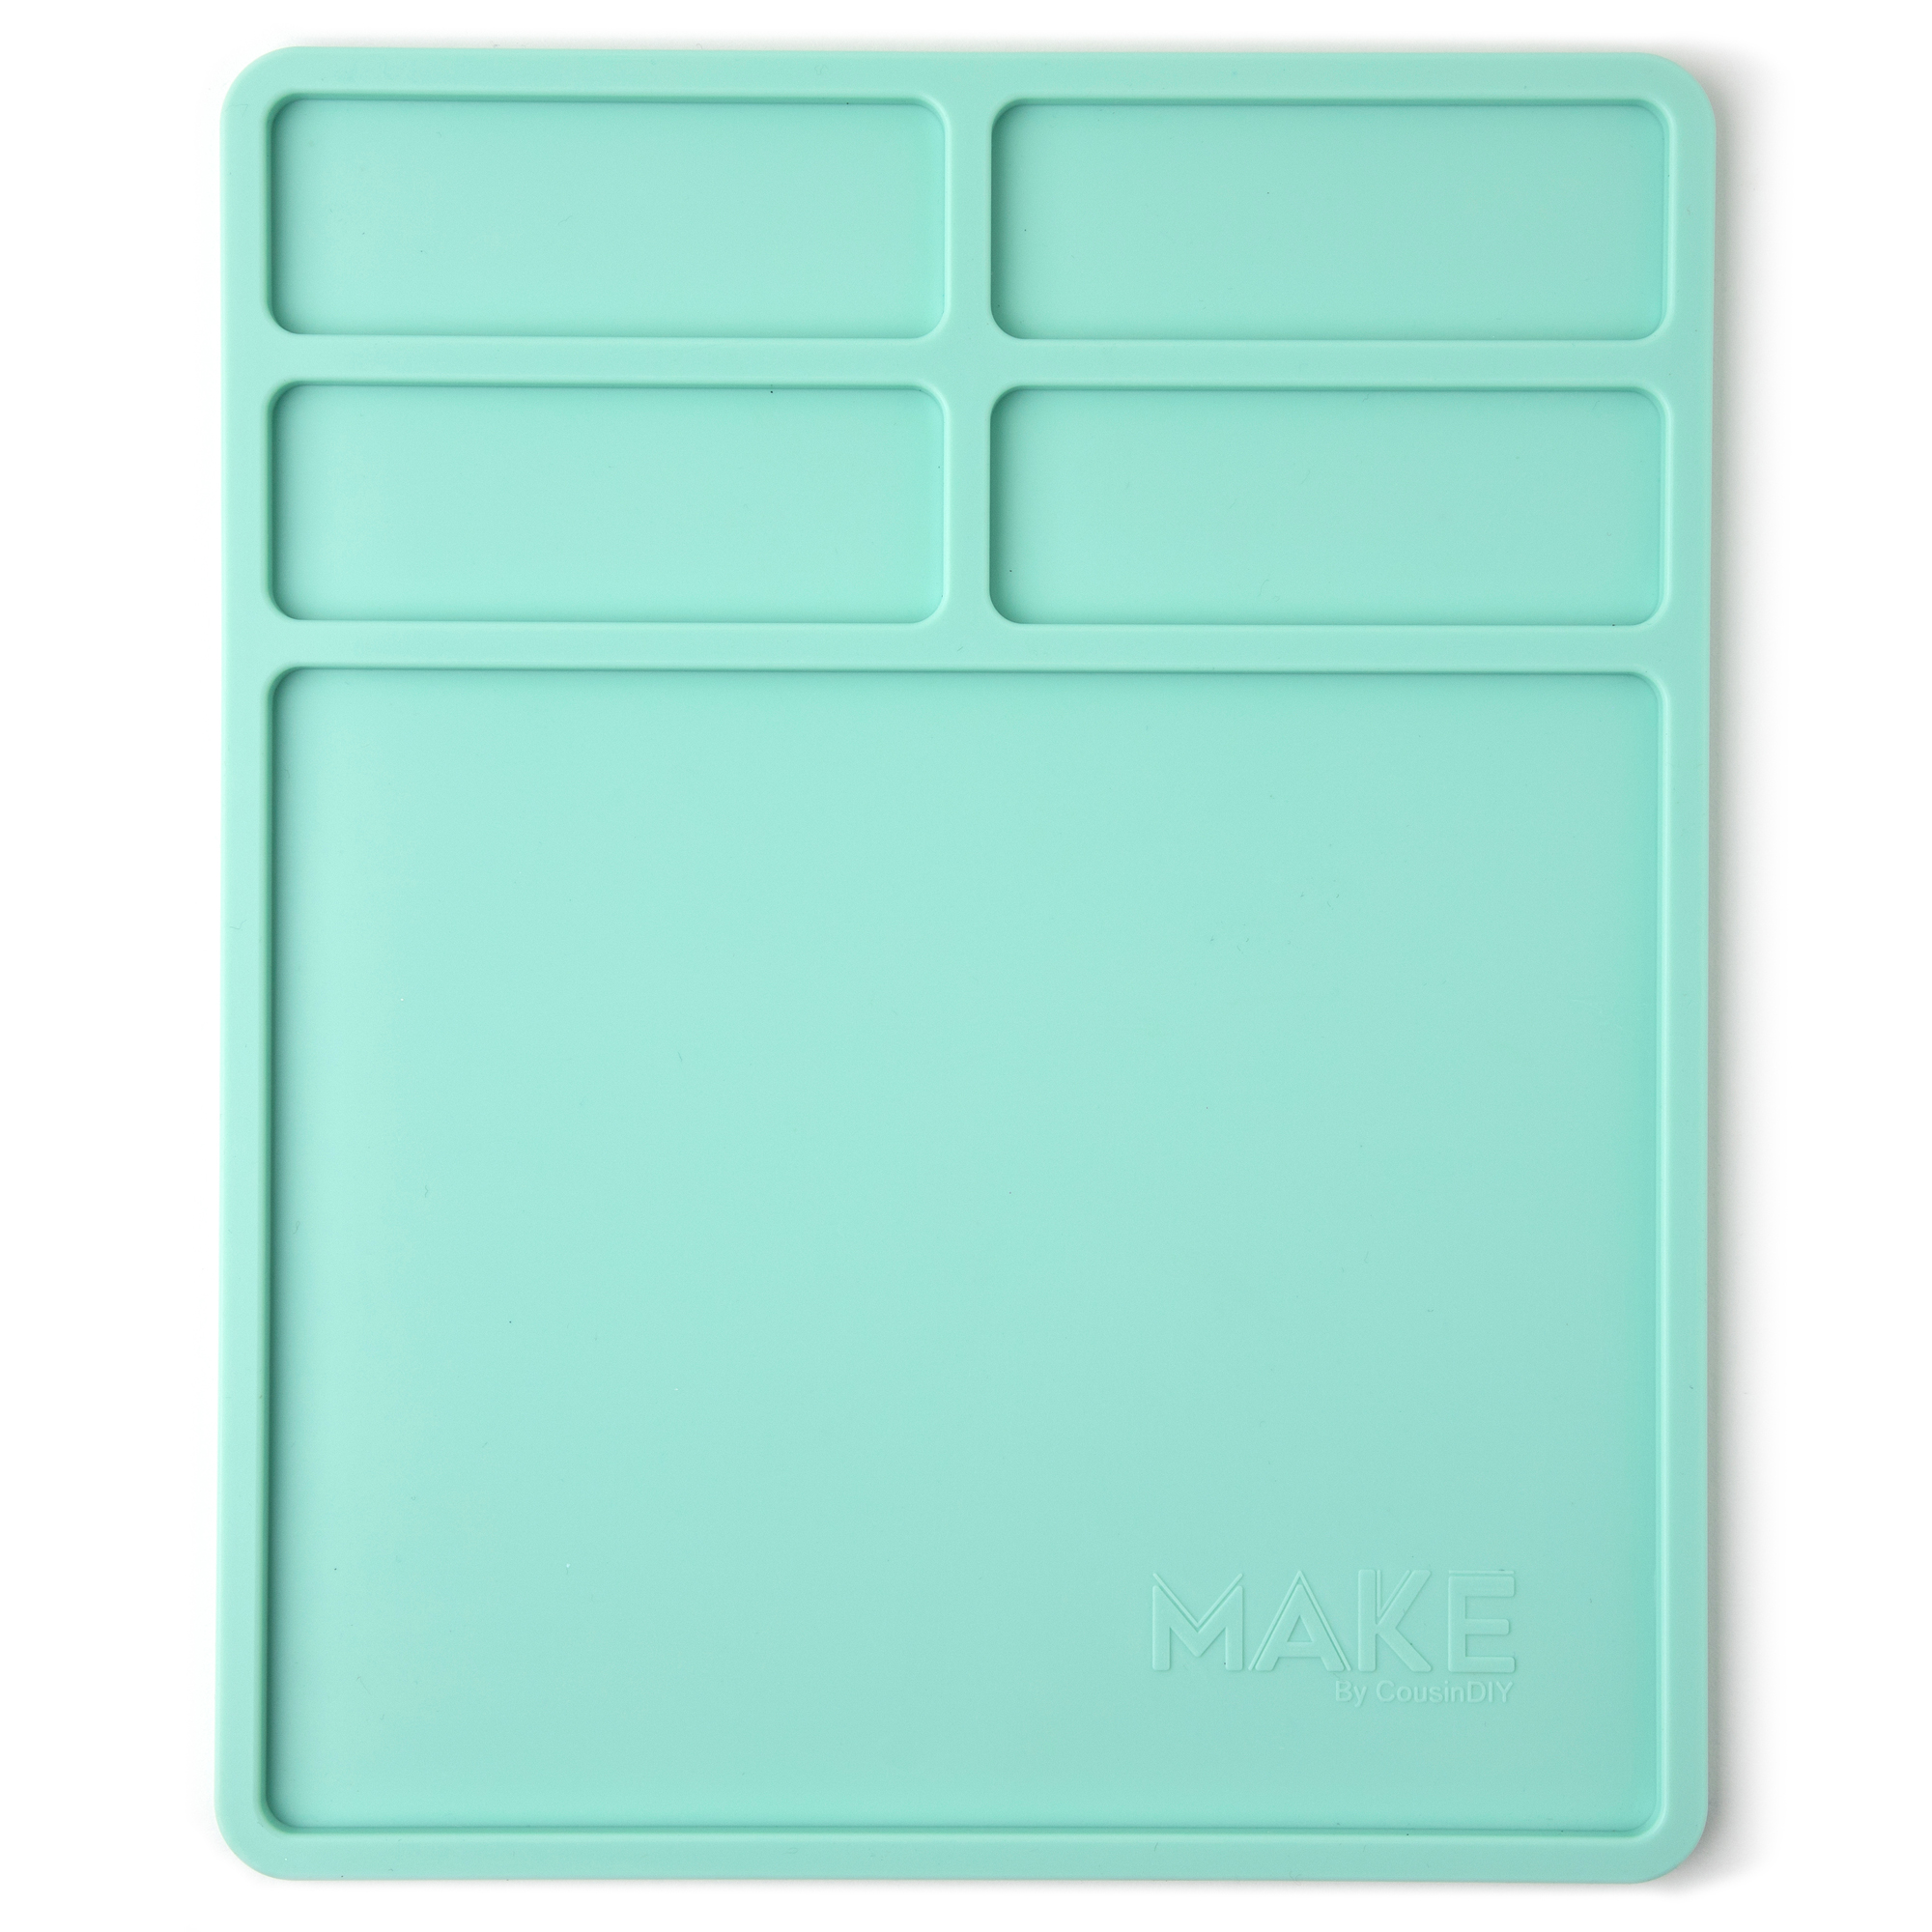 Cousin DIY Silicone Bead and Crafting Mat with Recessed Compartments, Teal  Blue, 1 Piece